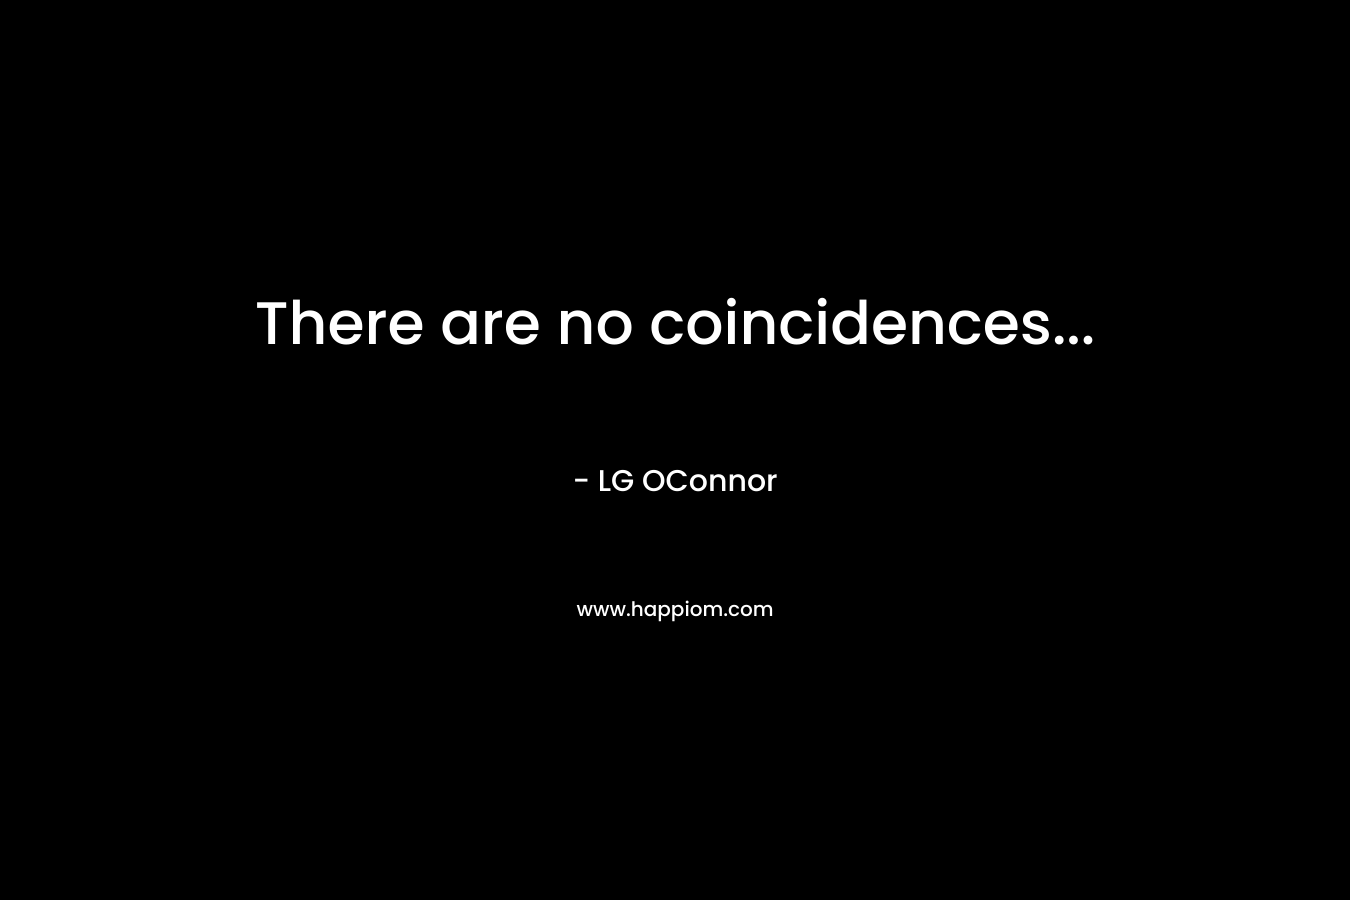 There are no coincidences...